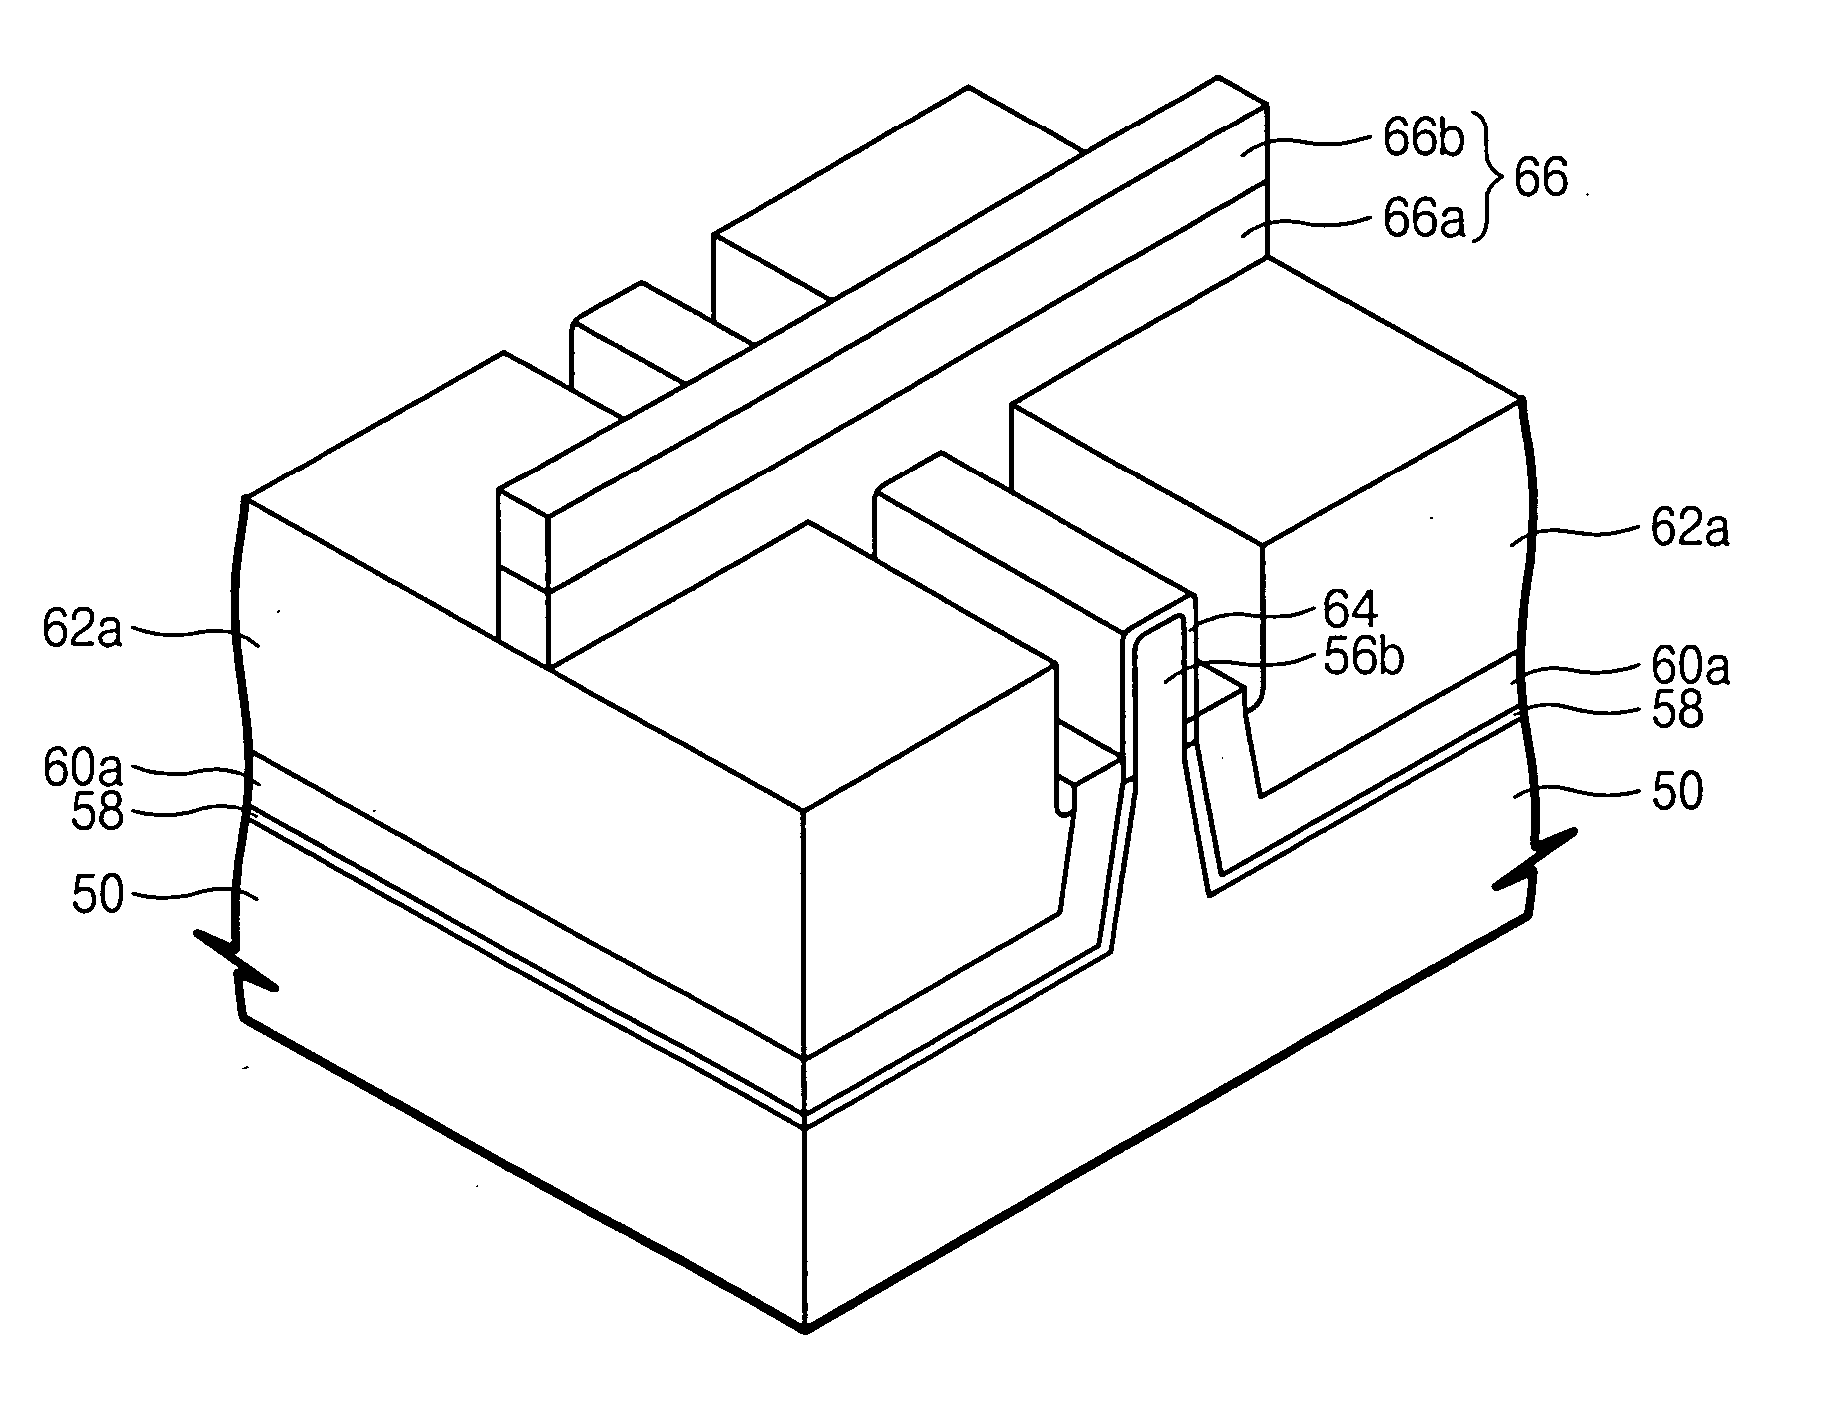 Vertical channel field effect transistors having insulating layers thereon and methods of fabricating the same